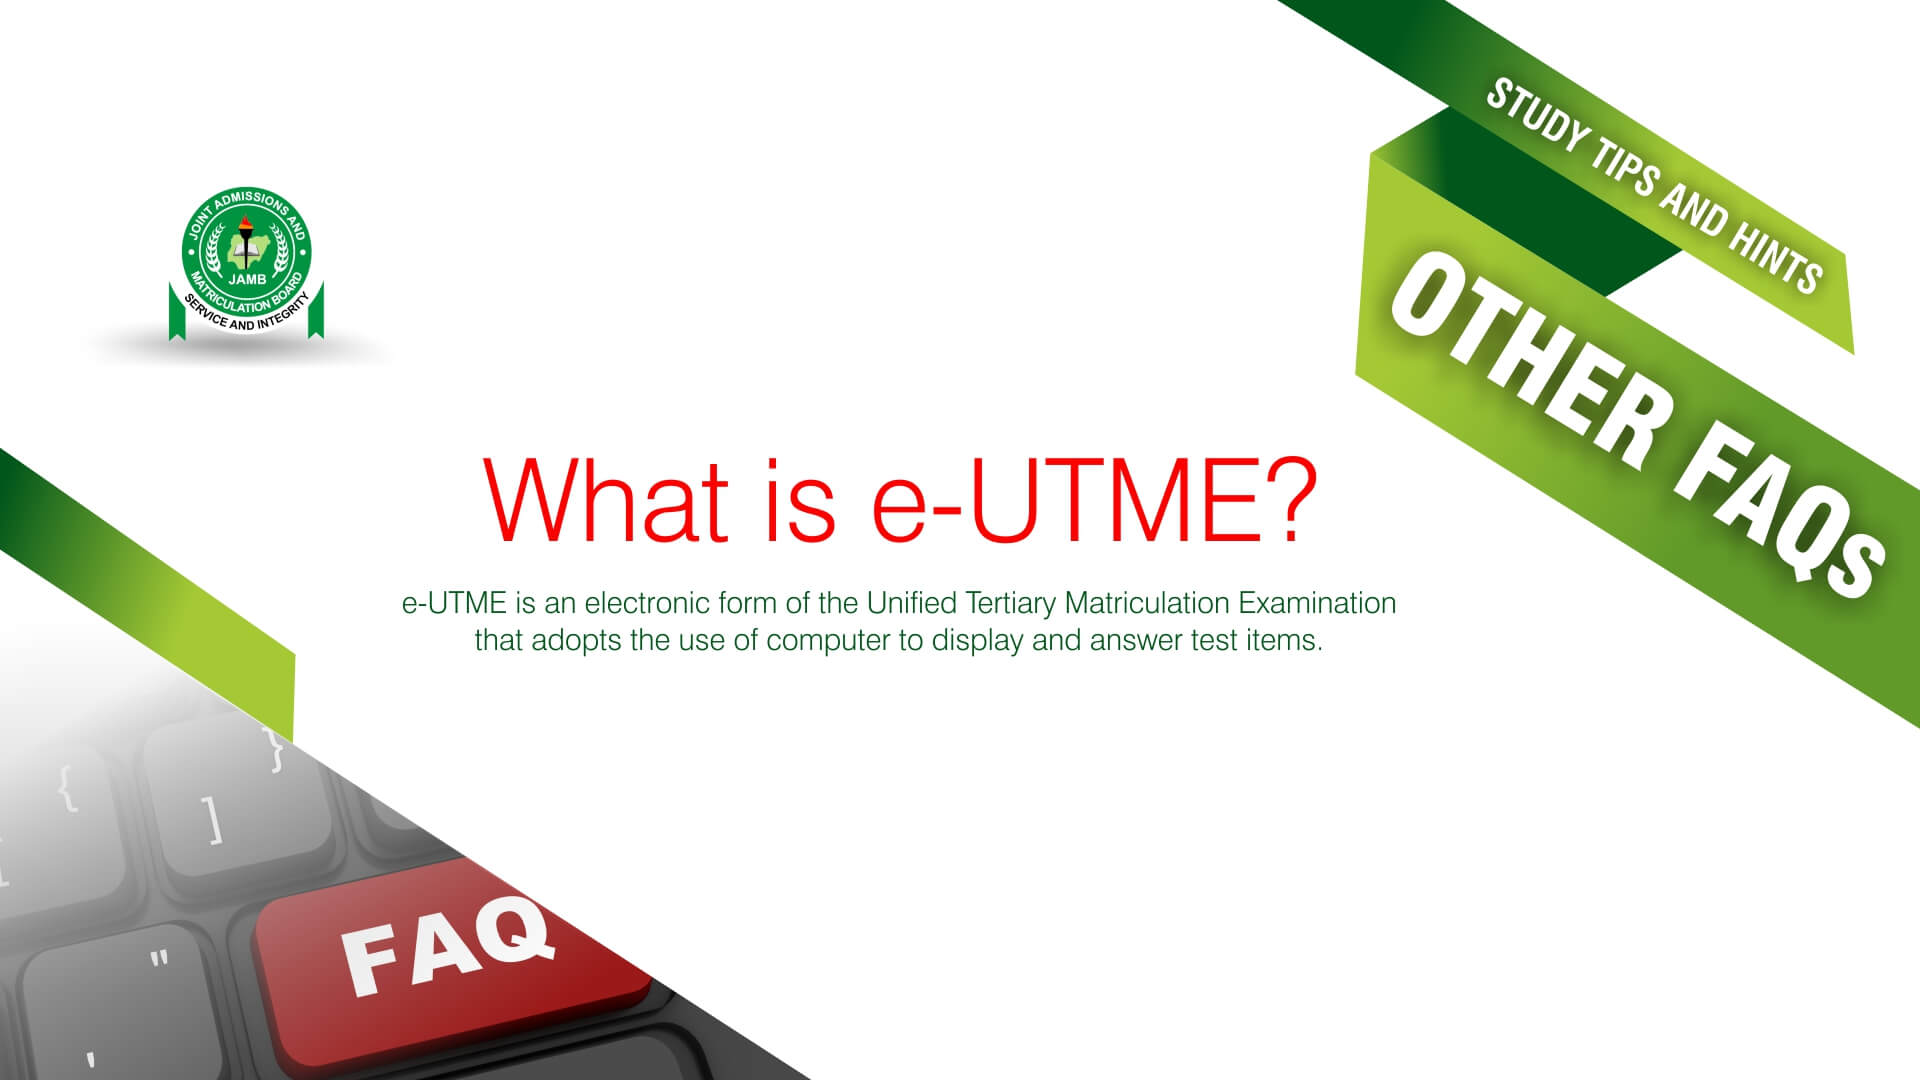 What is e-UTME?